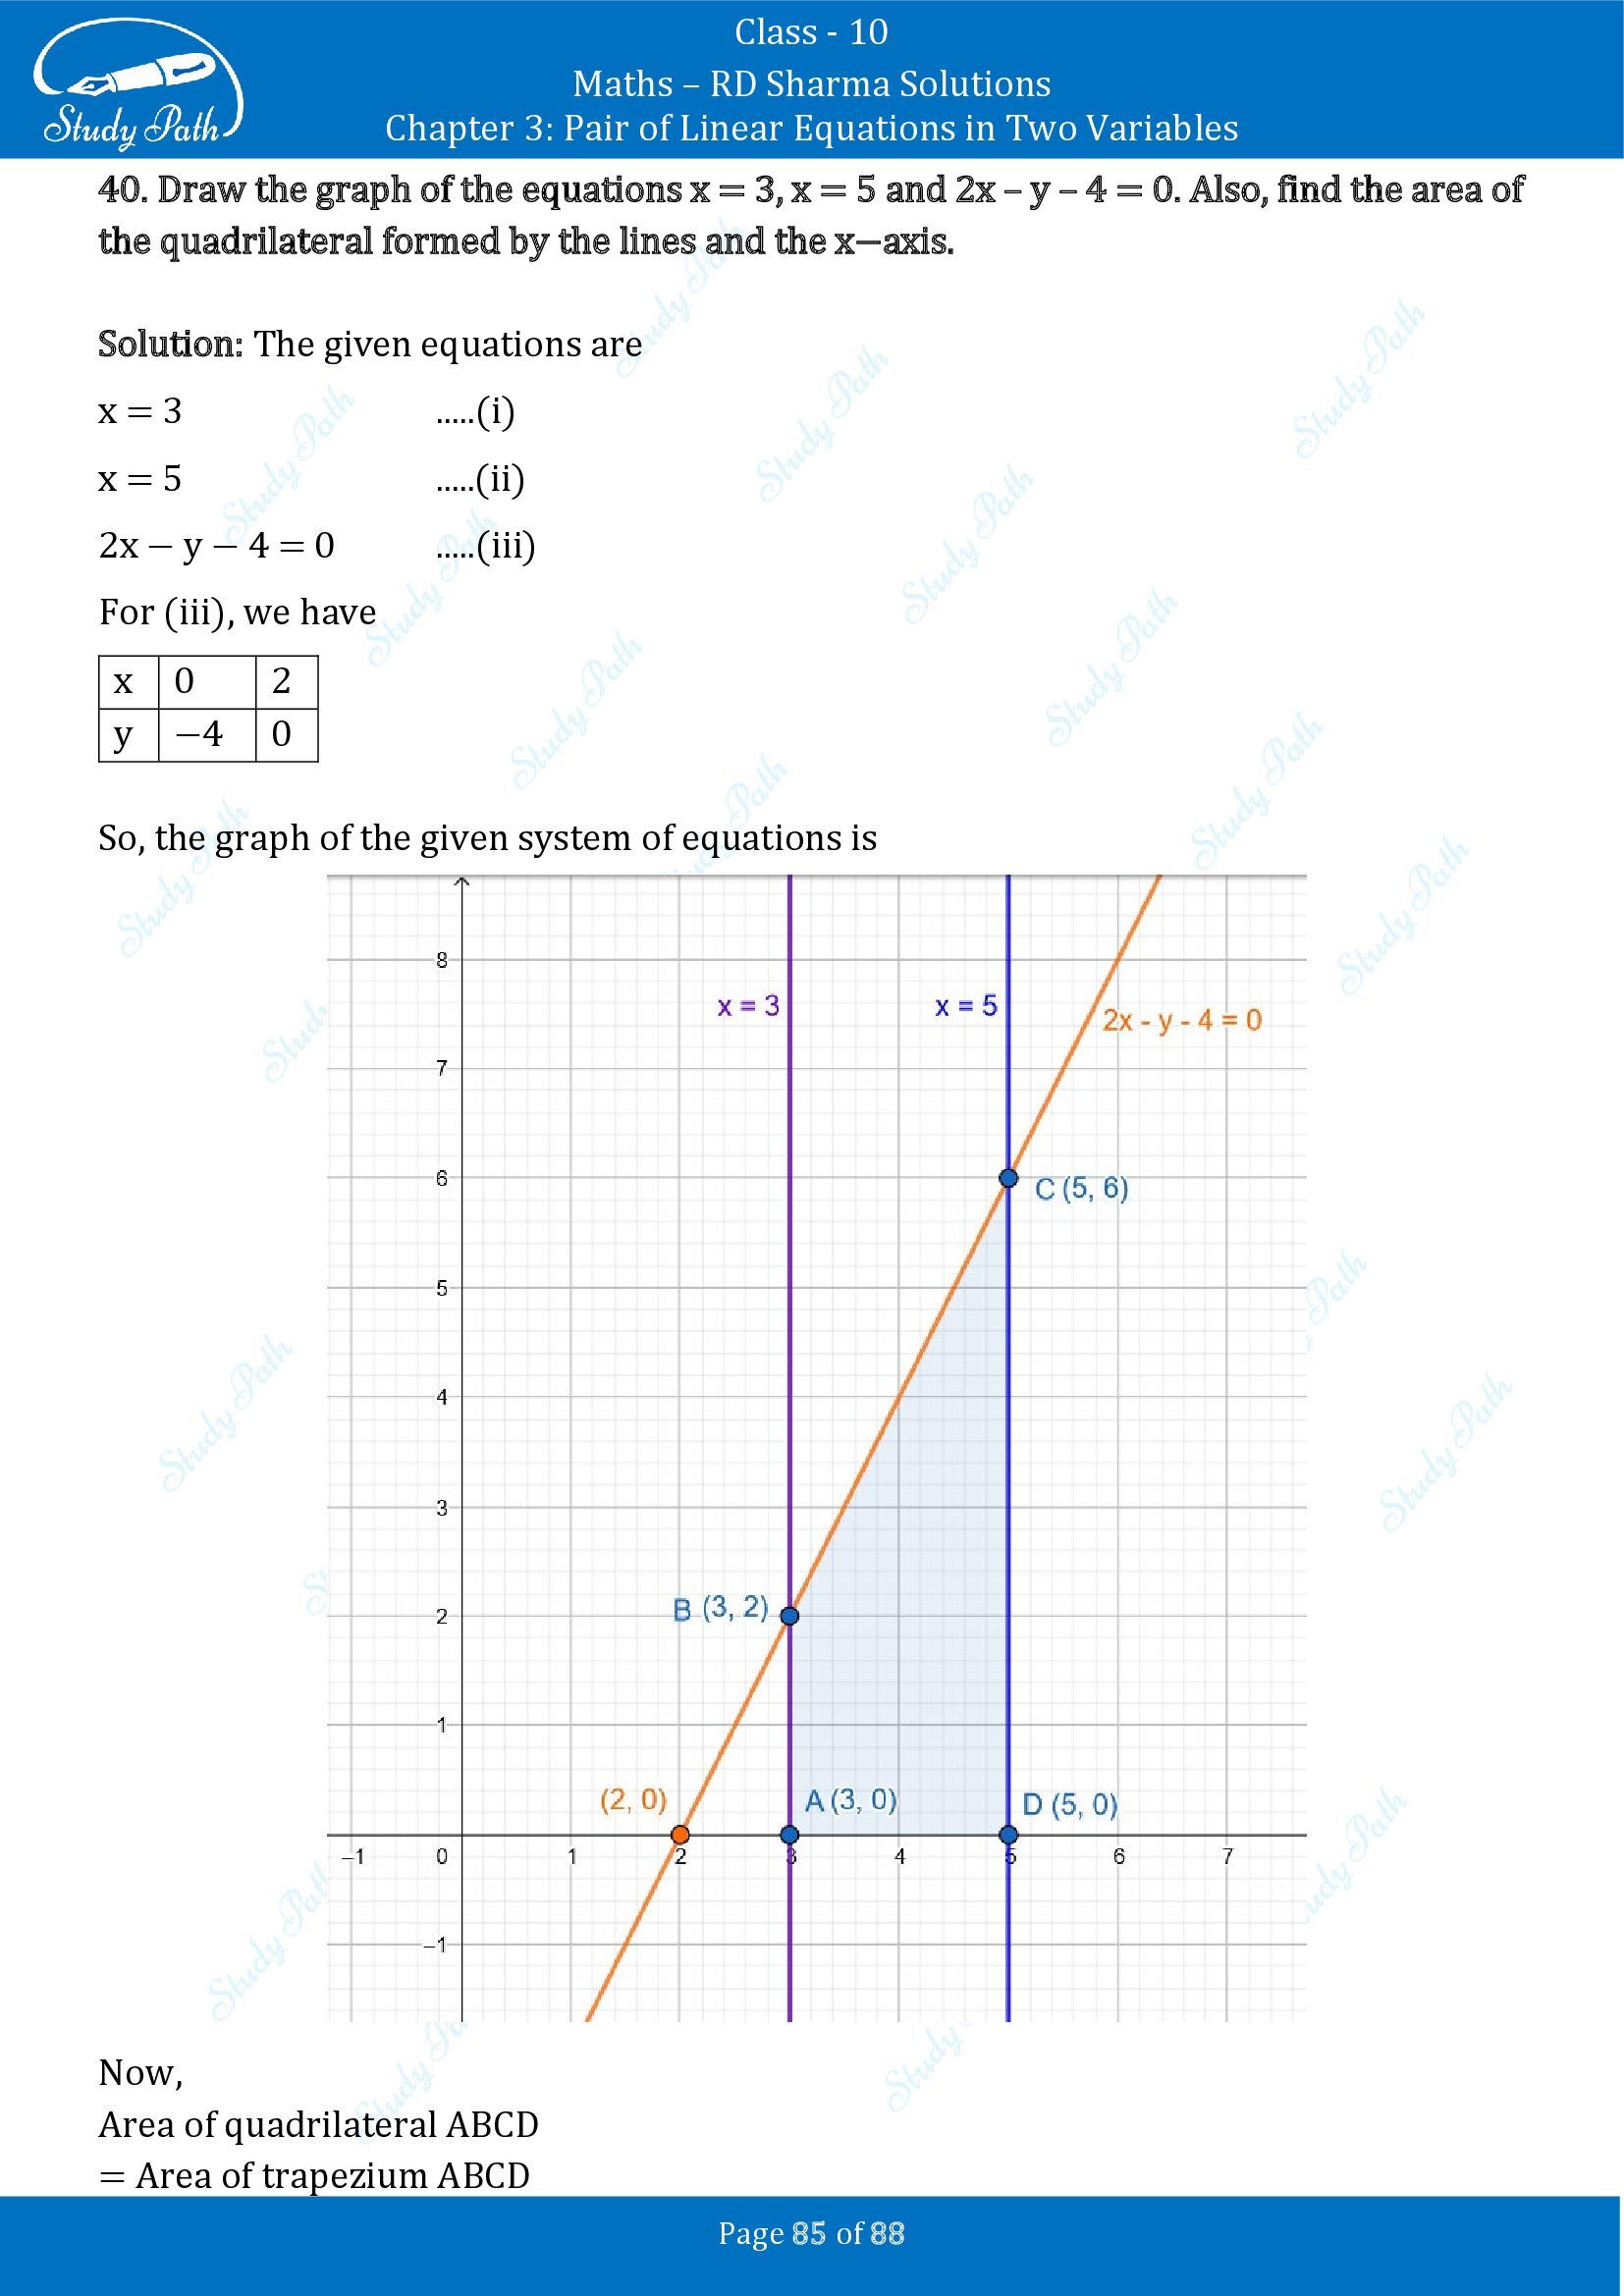 RD Sharma Solutions Class 10 Chapter 3 Pair of Linear Equations in Two Variables Exercise 3.2 00085